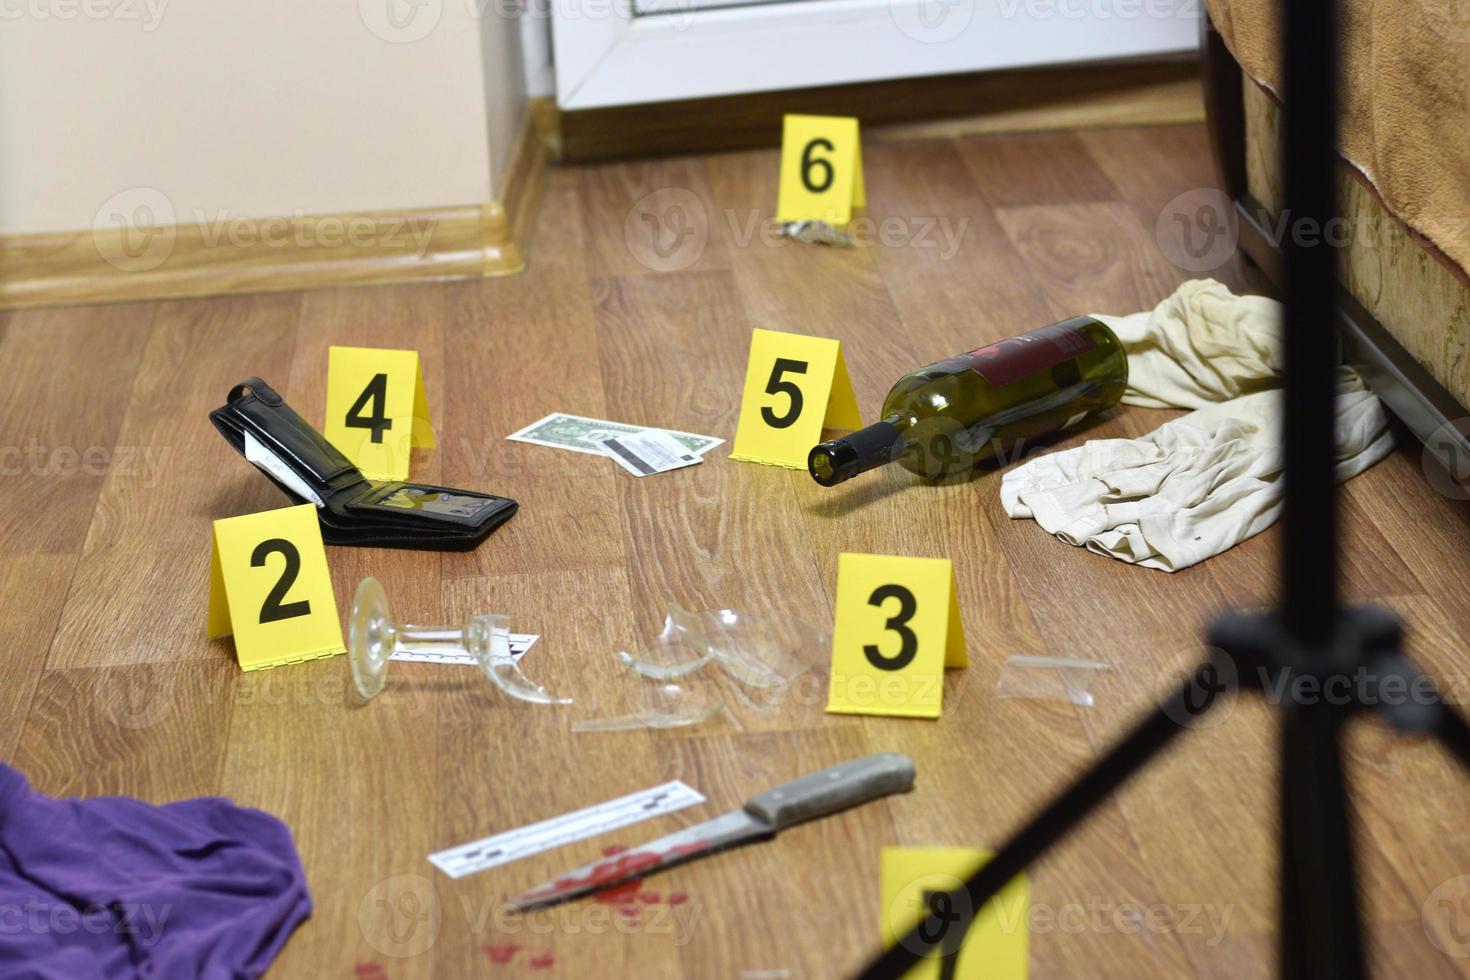 Crime scene investigation - numbering of evidences after the murder in the apartment. Broken glass of wine, knife with clothes, wallet and bottle as evidence photo